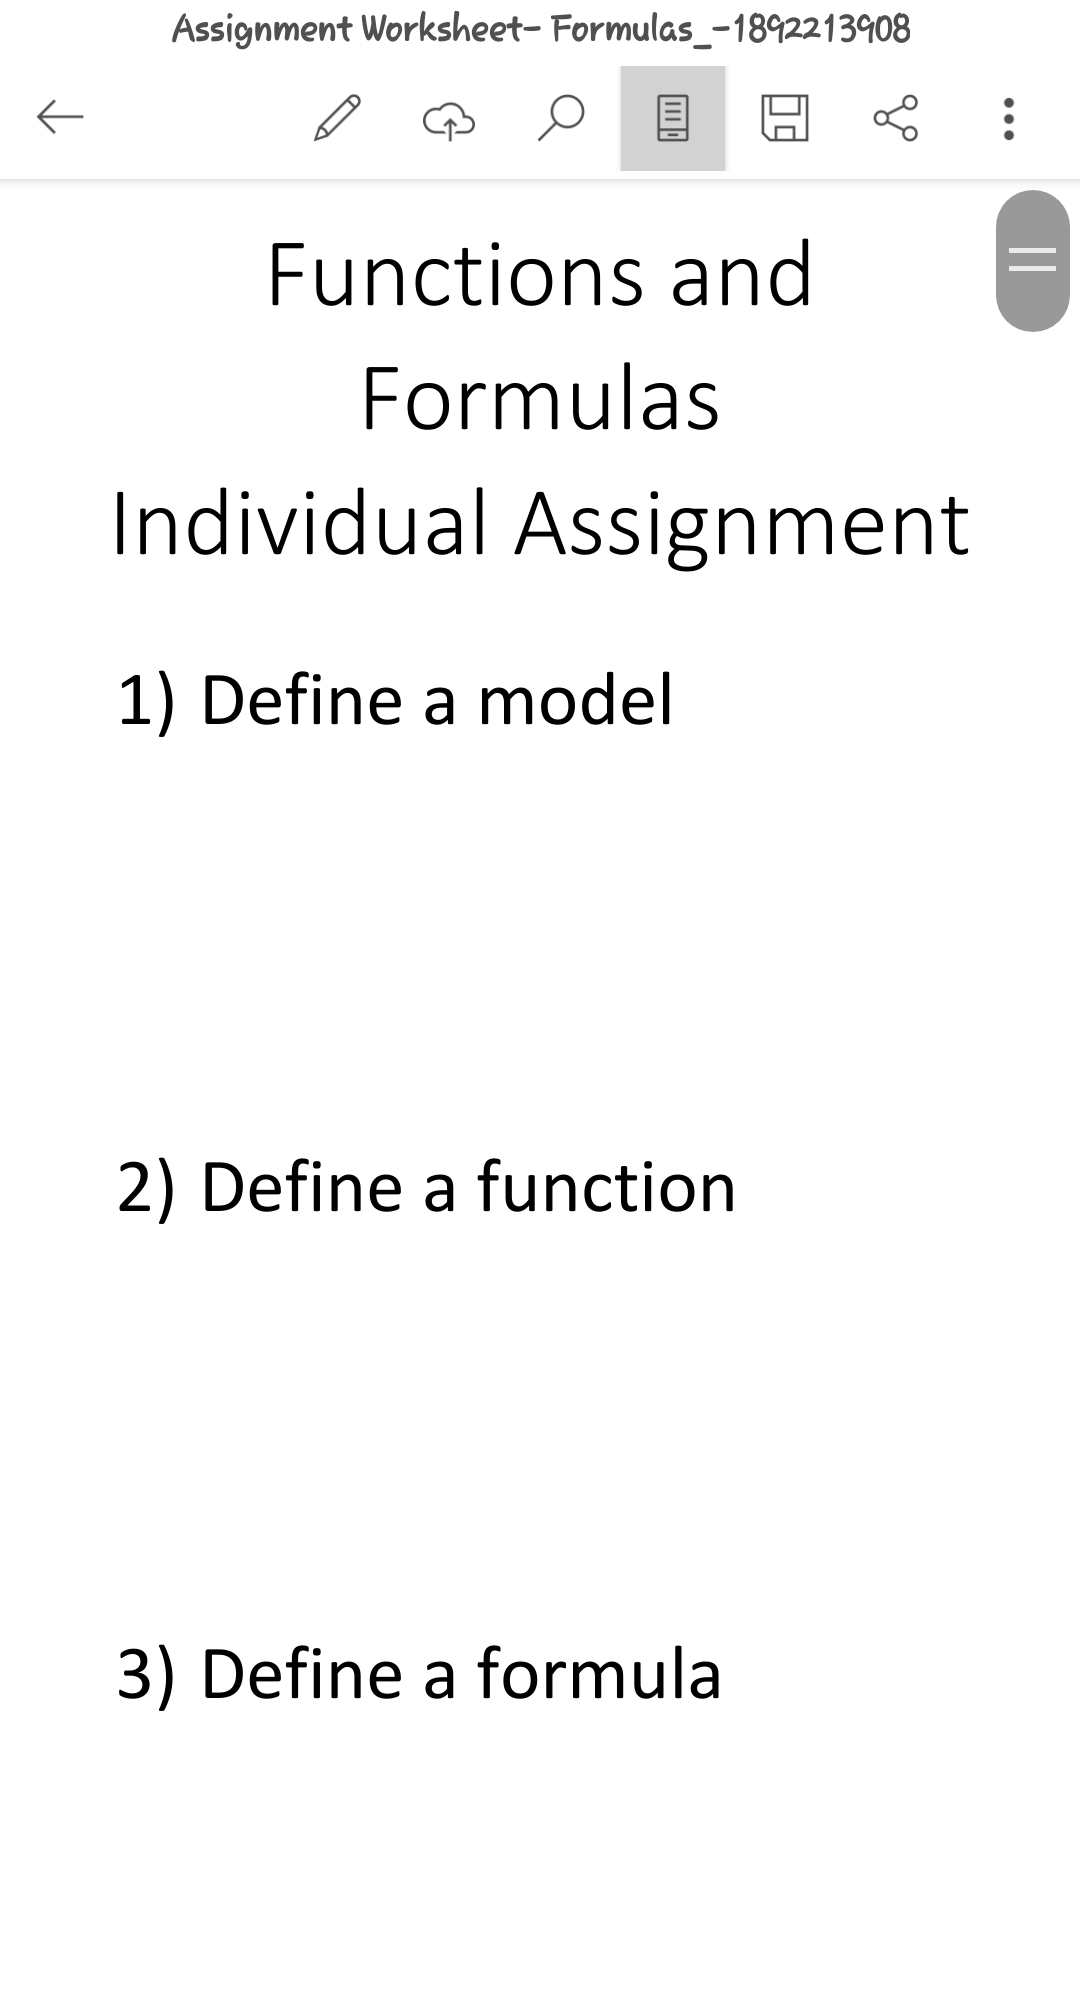 ←
Assignment Worksheet- Formulas_-1892213908
Functions and
Formulas
Individual Assignment
1) Define a model
2) Define a function
3) Define a formula
:
||